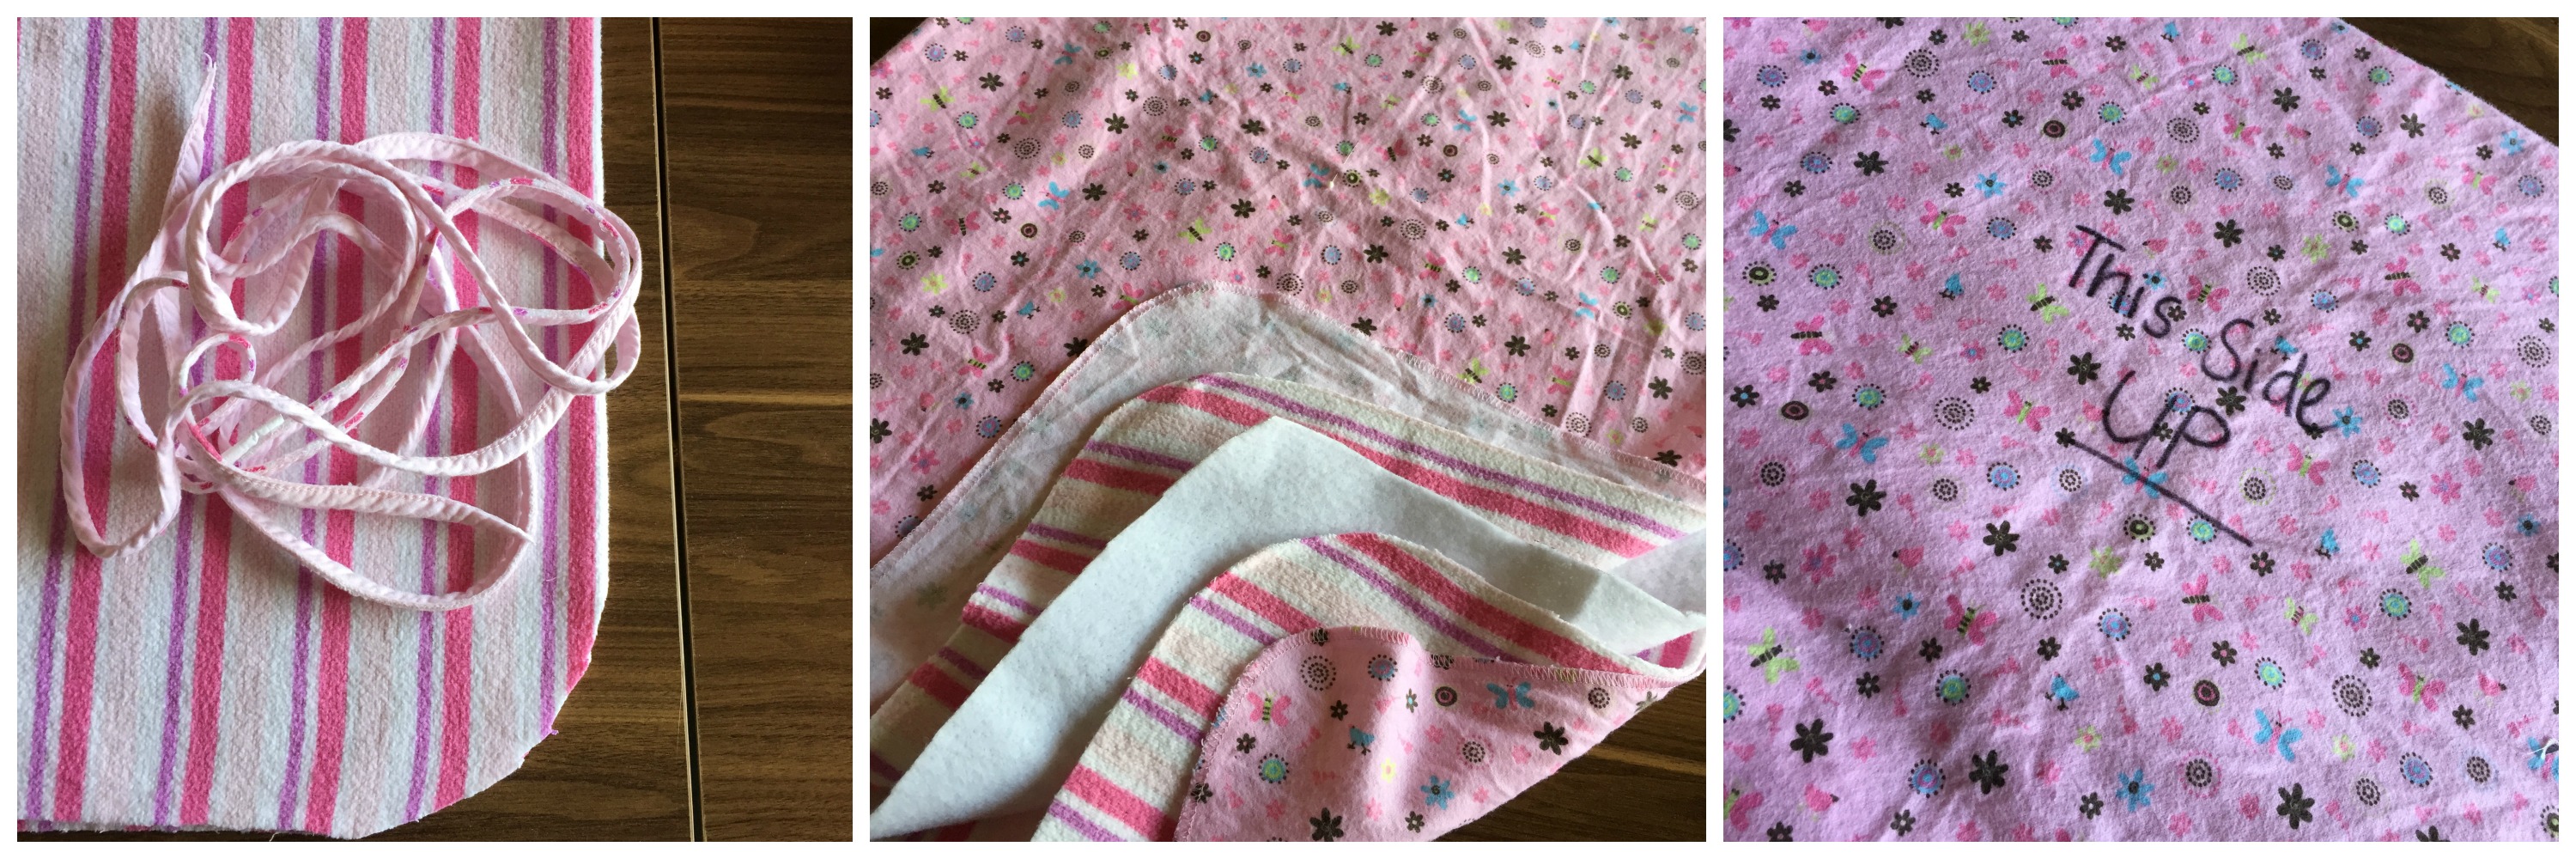 Sew: DIY A Thrifty Portable Pressing Mat {Turn Almost Any Surface into an Ironing Board}